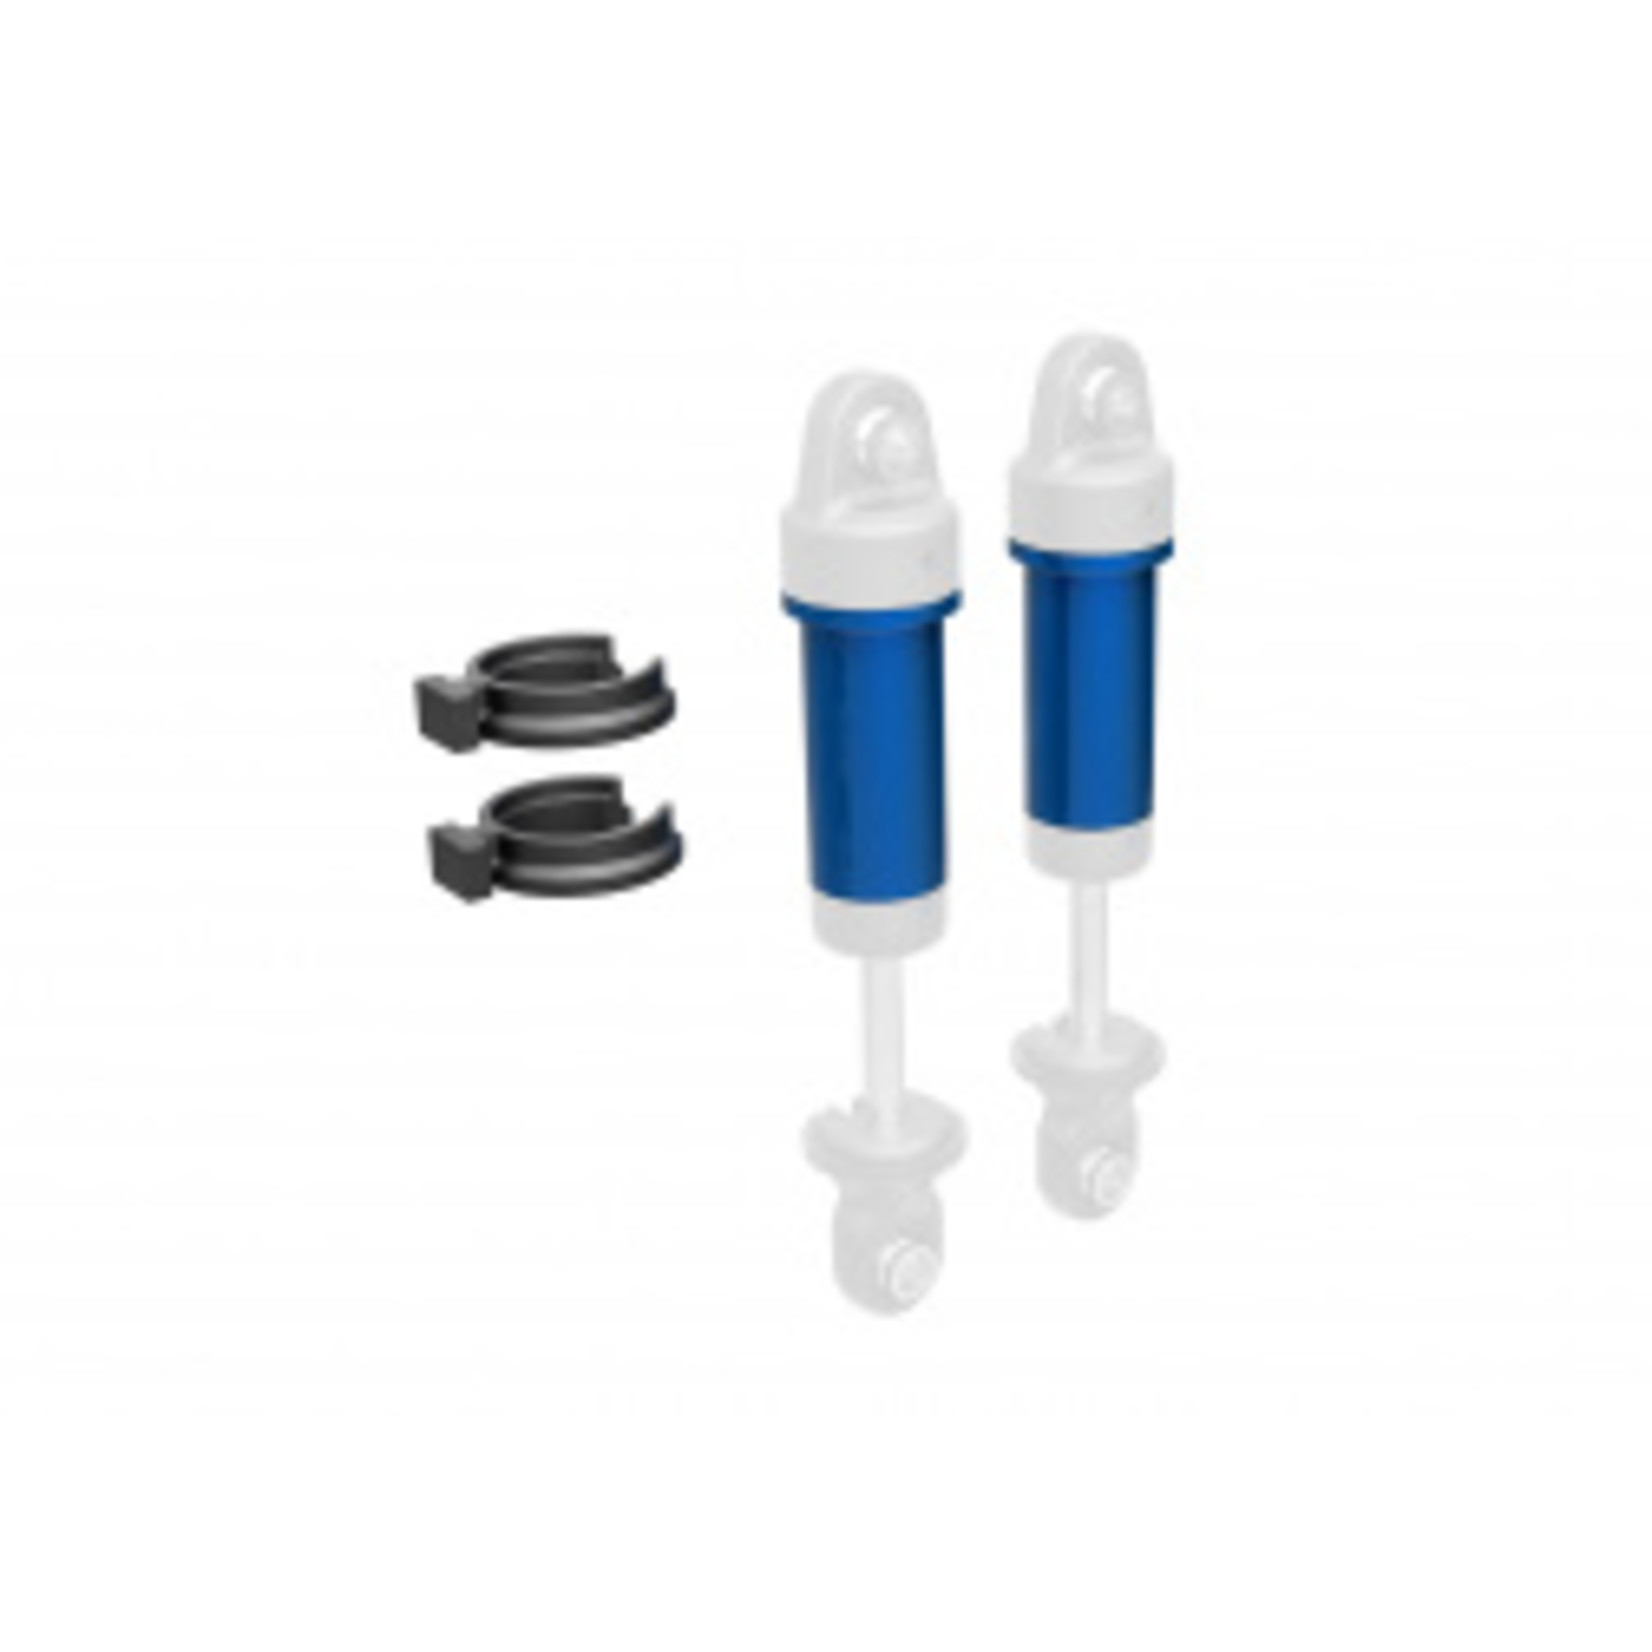 Traxxas 9763-BLUE  Body, GTM shock, 6061-T6 aluminum (blue-anodized) (includes spring pre-load spacers) (2)